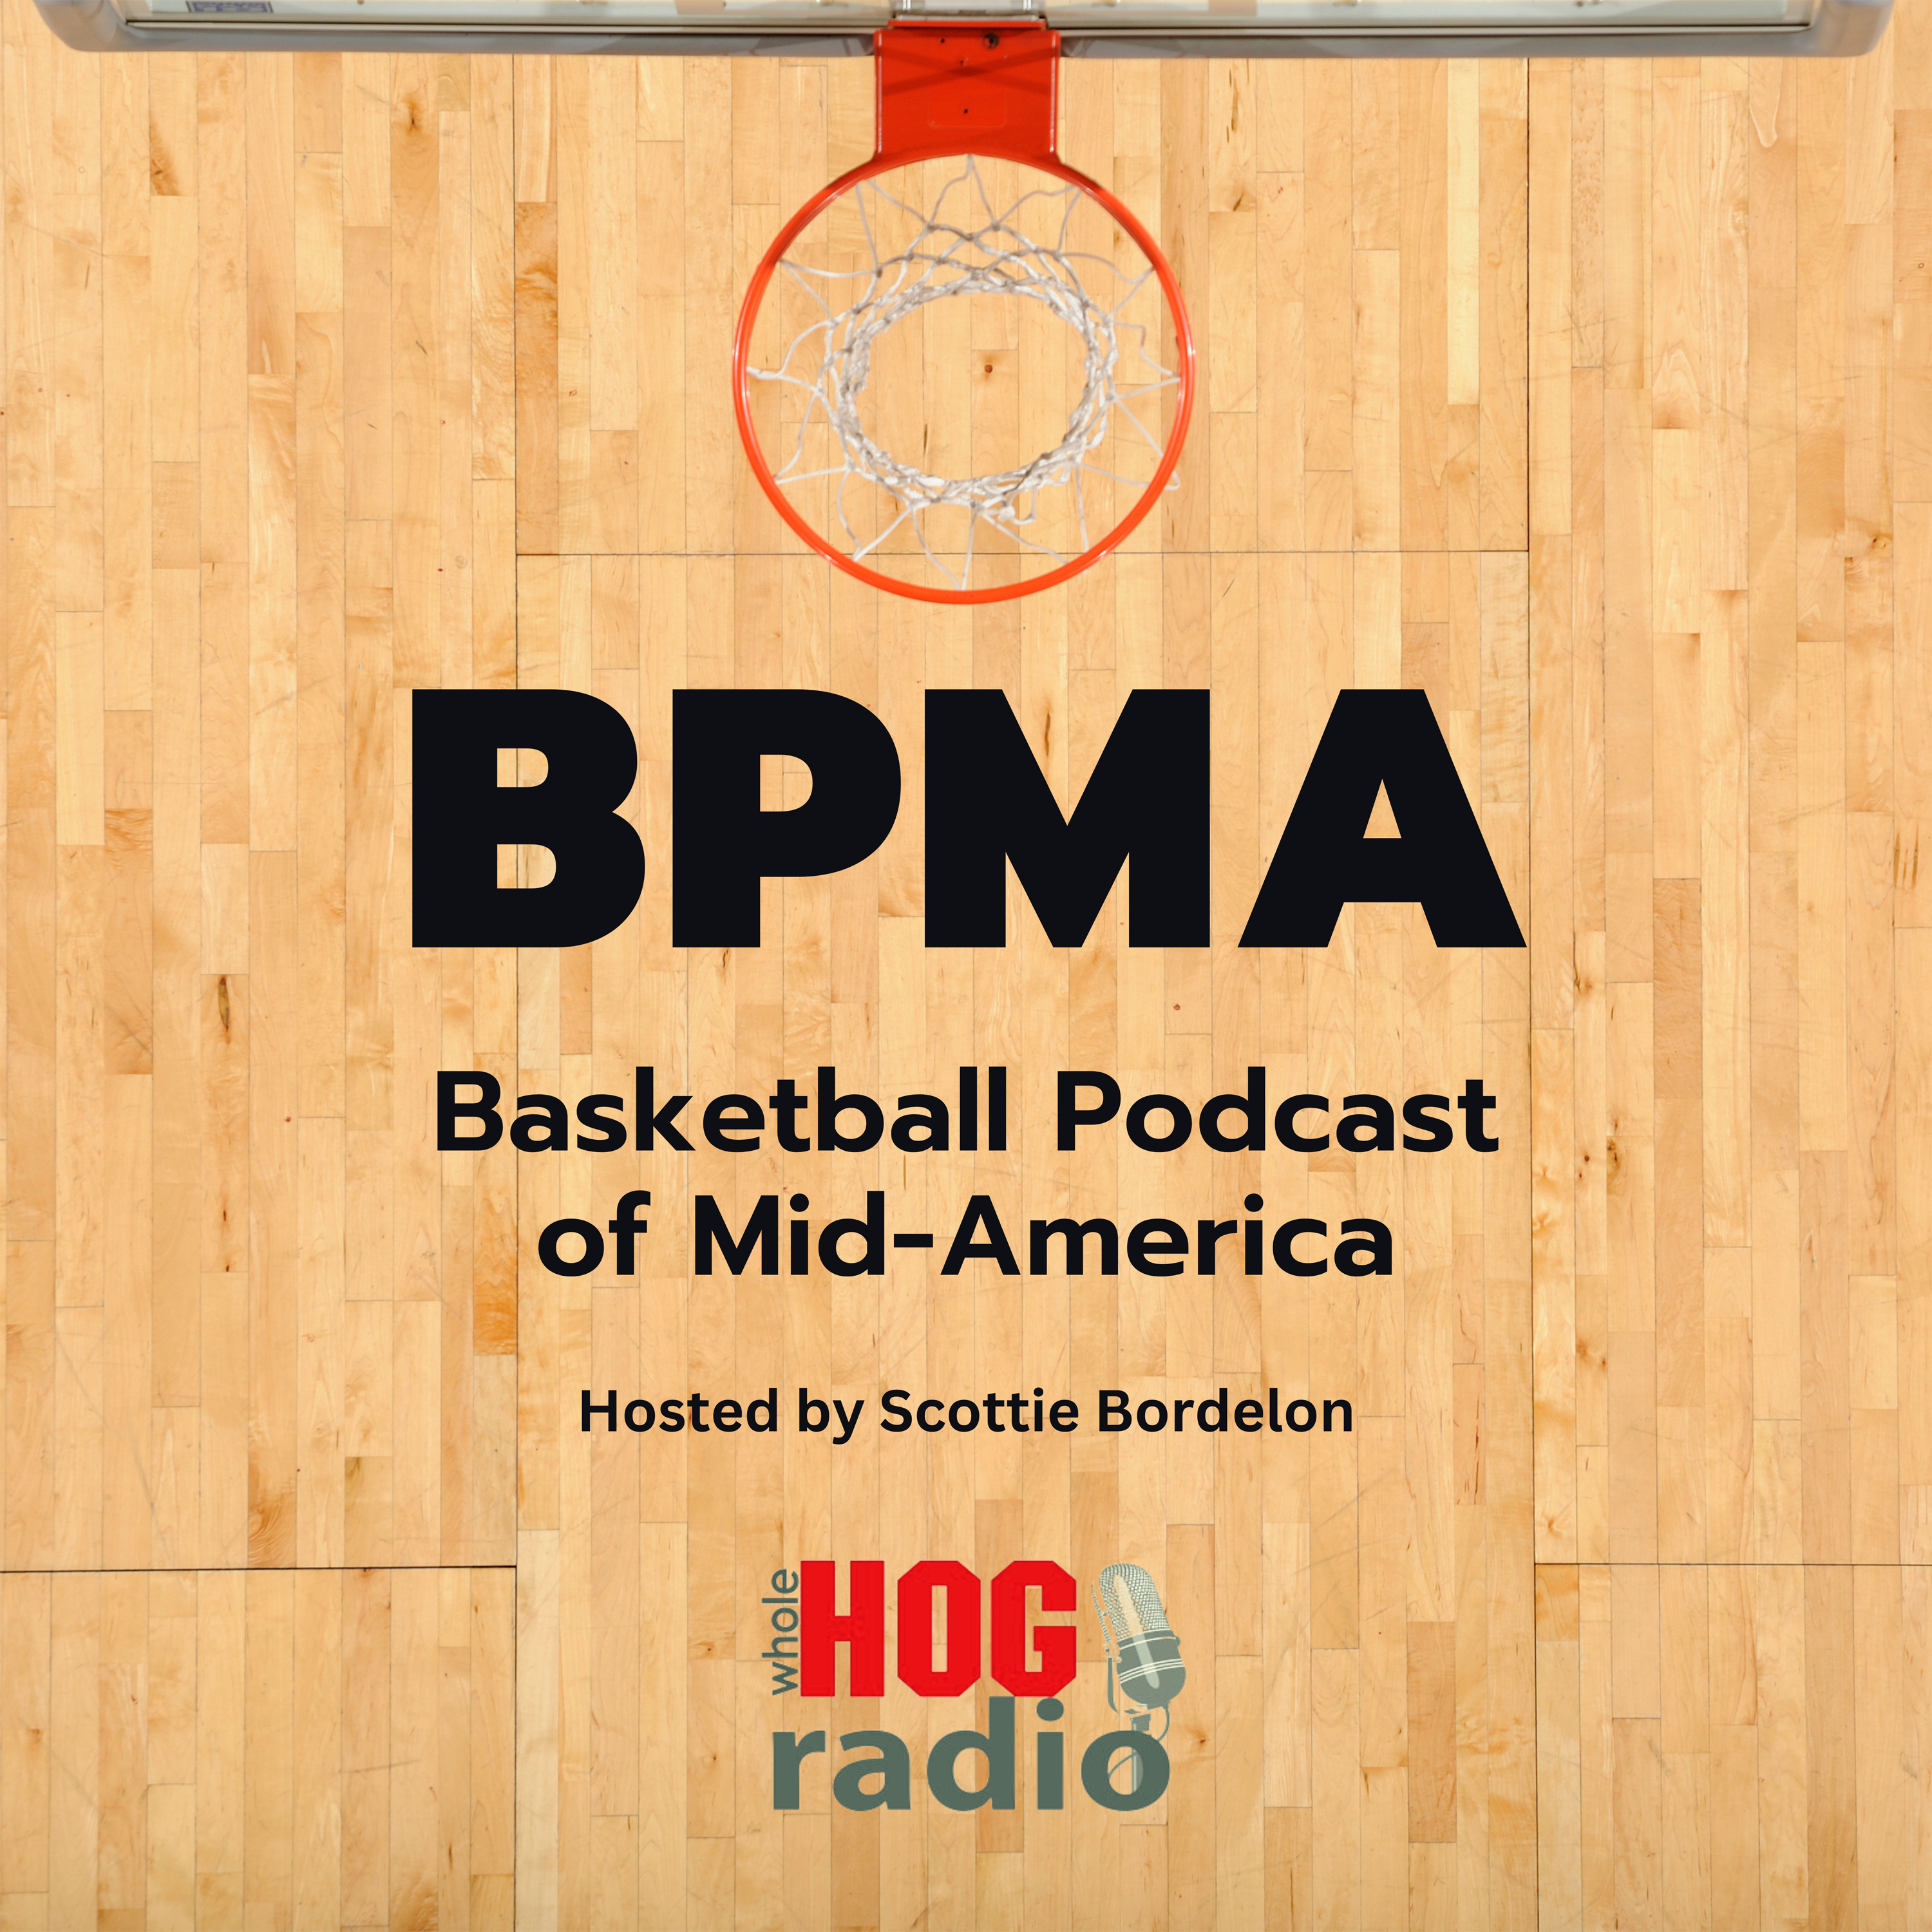 Basketball Podcast of Mid-America: A Moment in Time